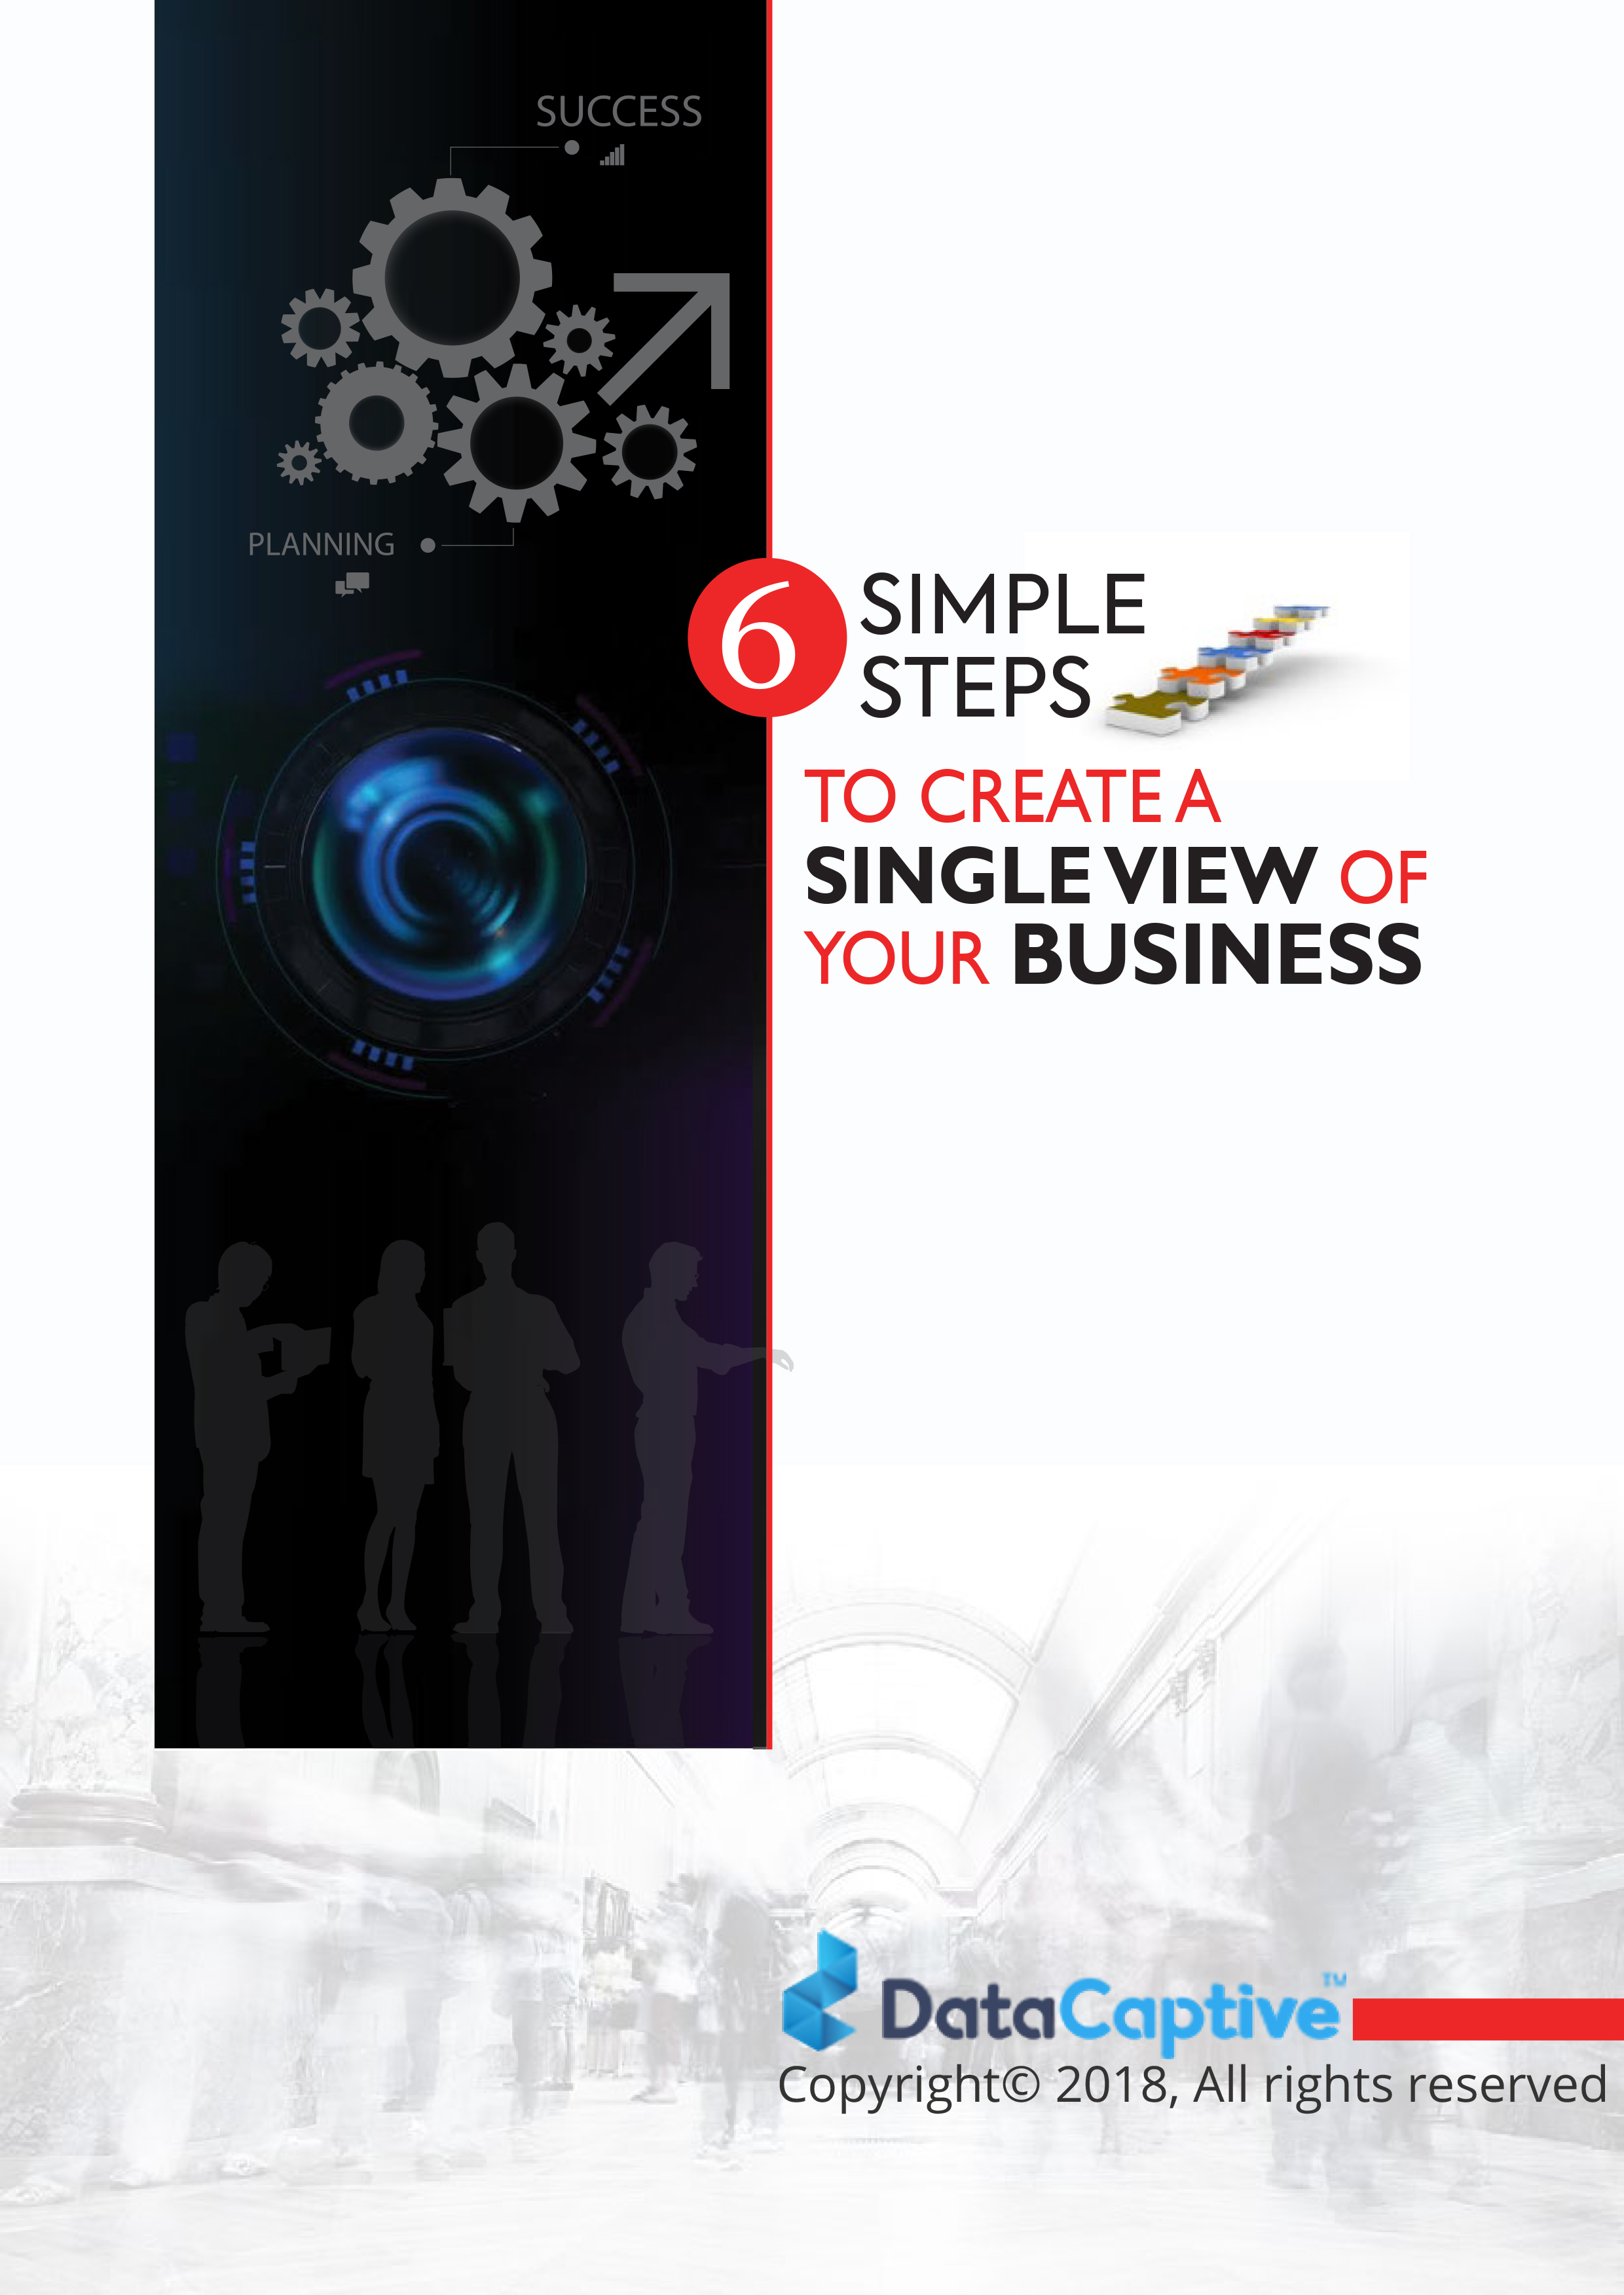 6 Simple Steps To Create A Single View Of Your Business - DataCaptive Whitepaper